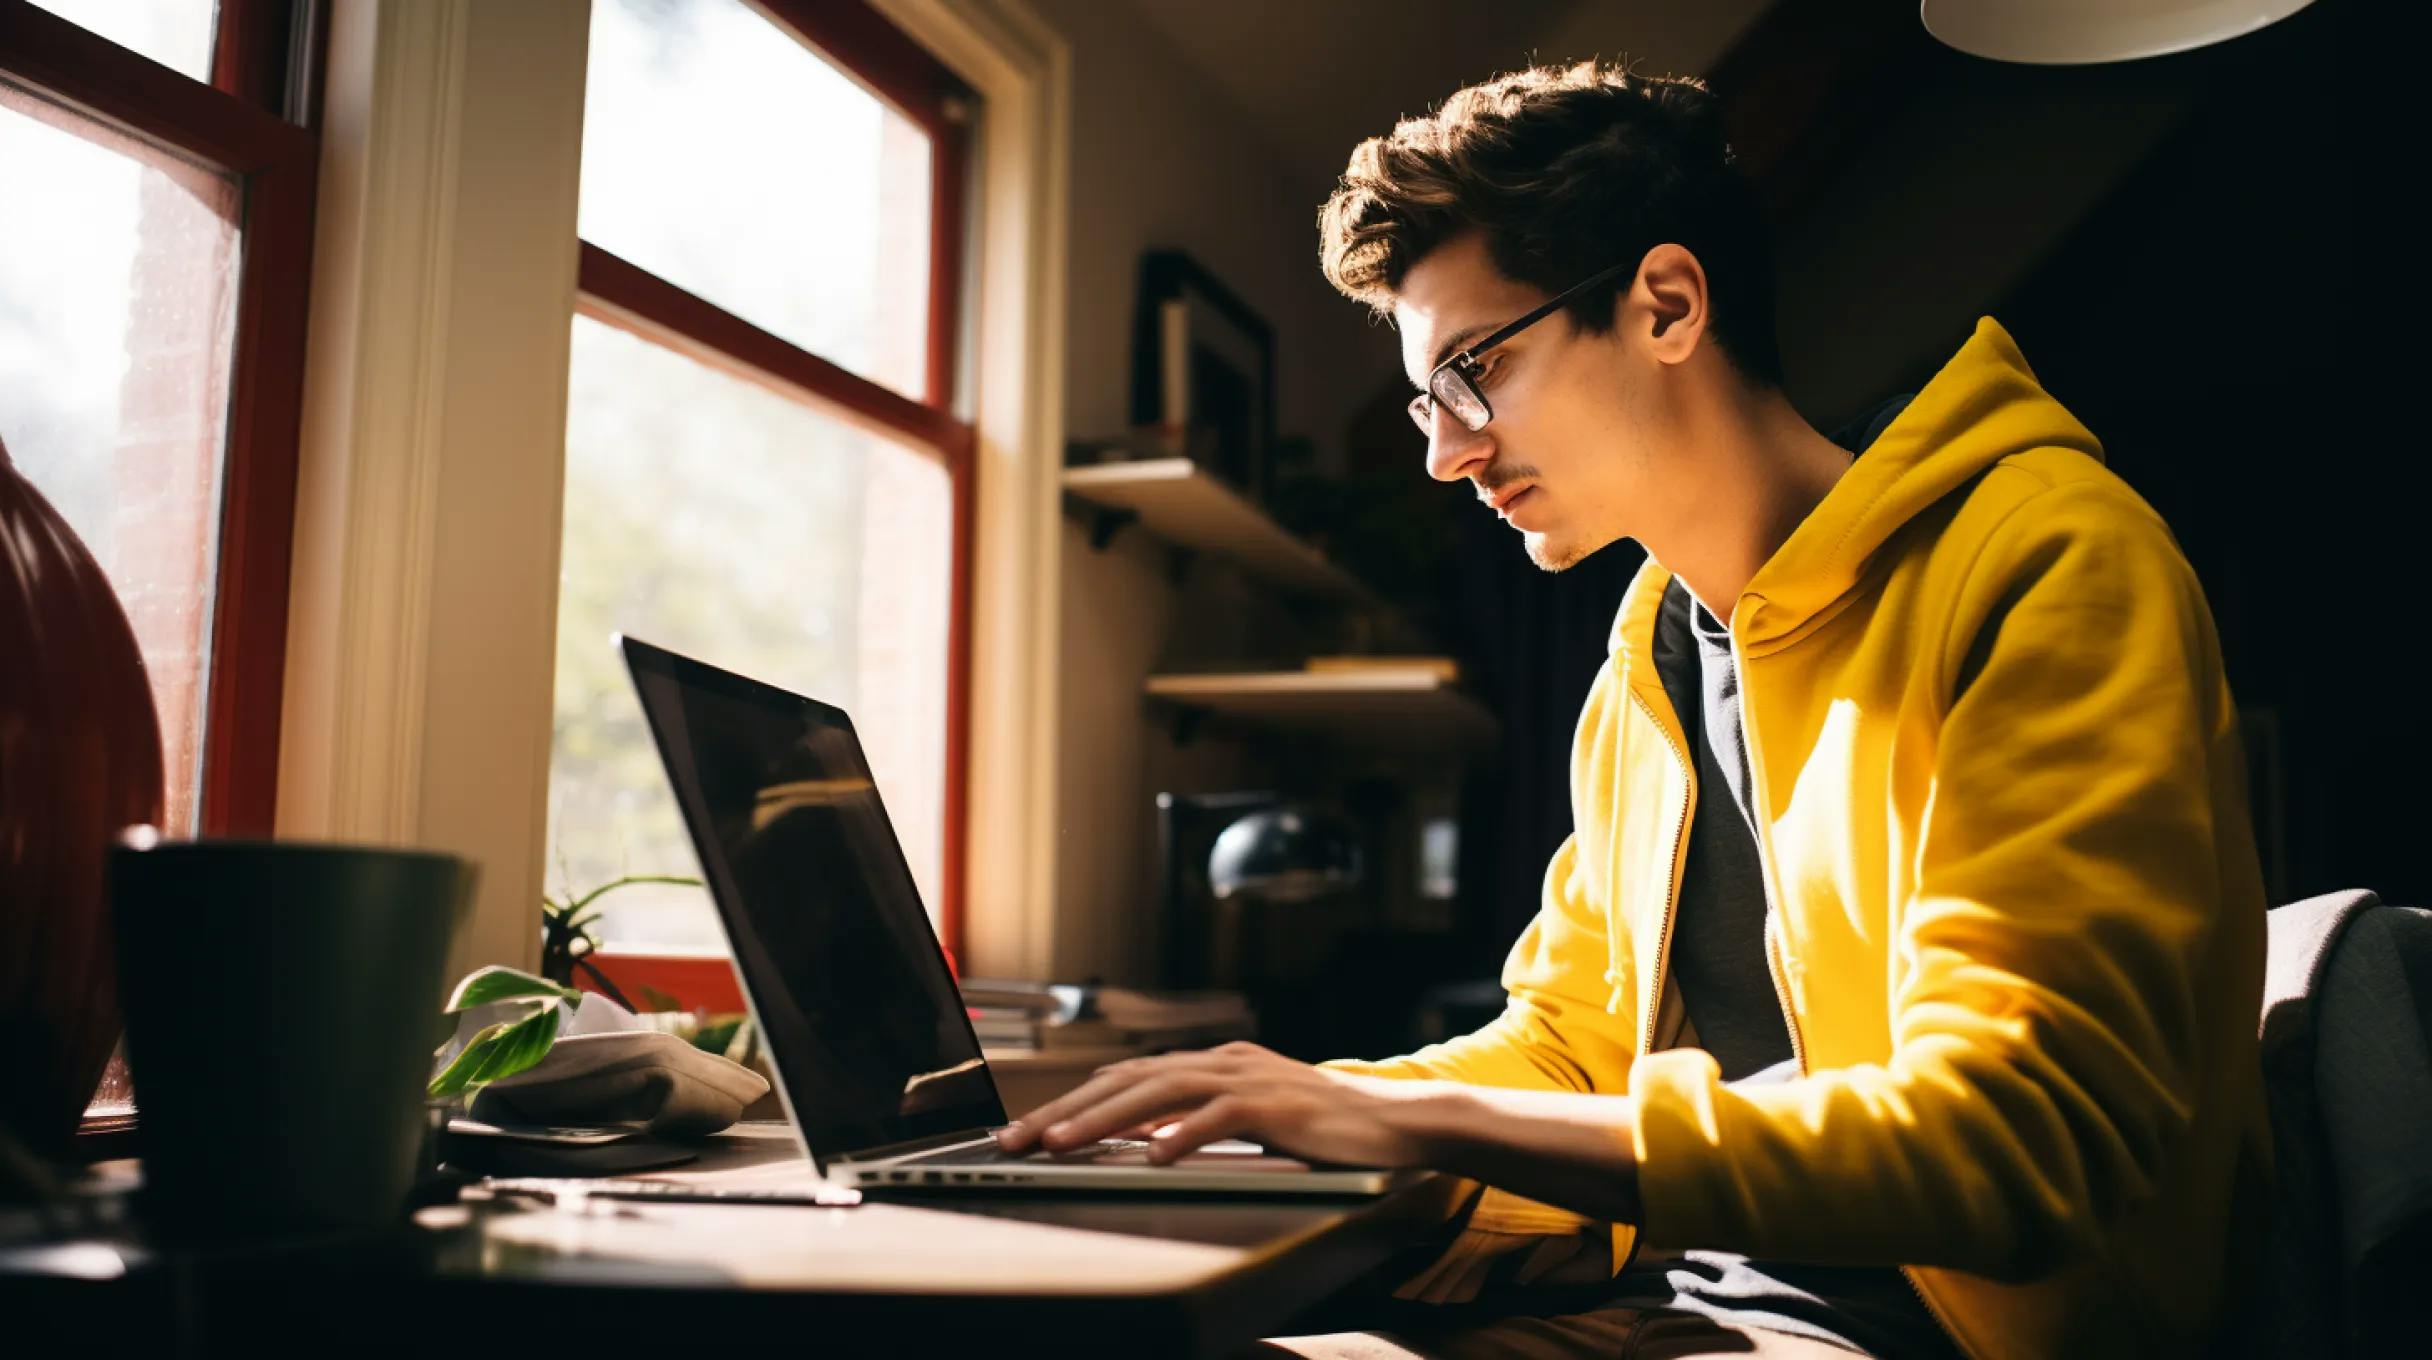 A young man in a yellow hoodie focused on his laptop, engrossed in his work.